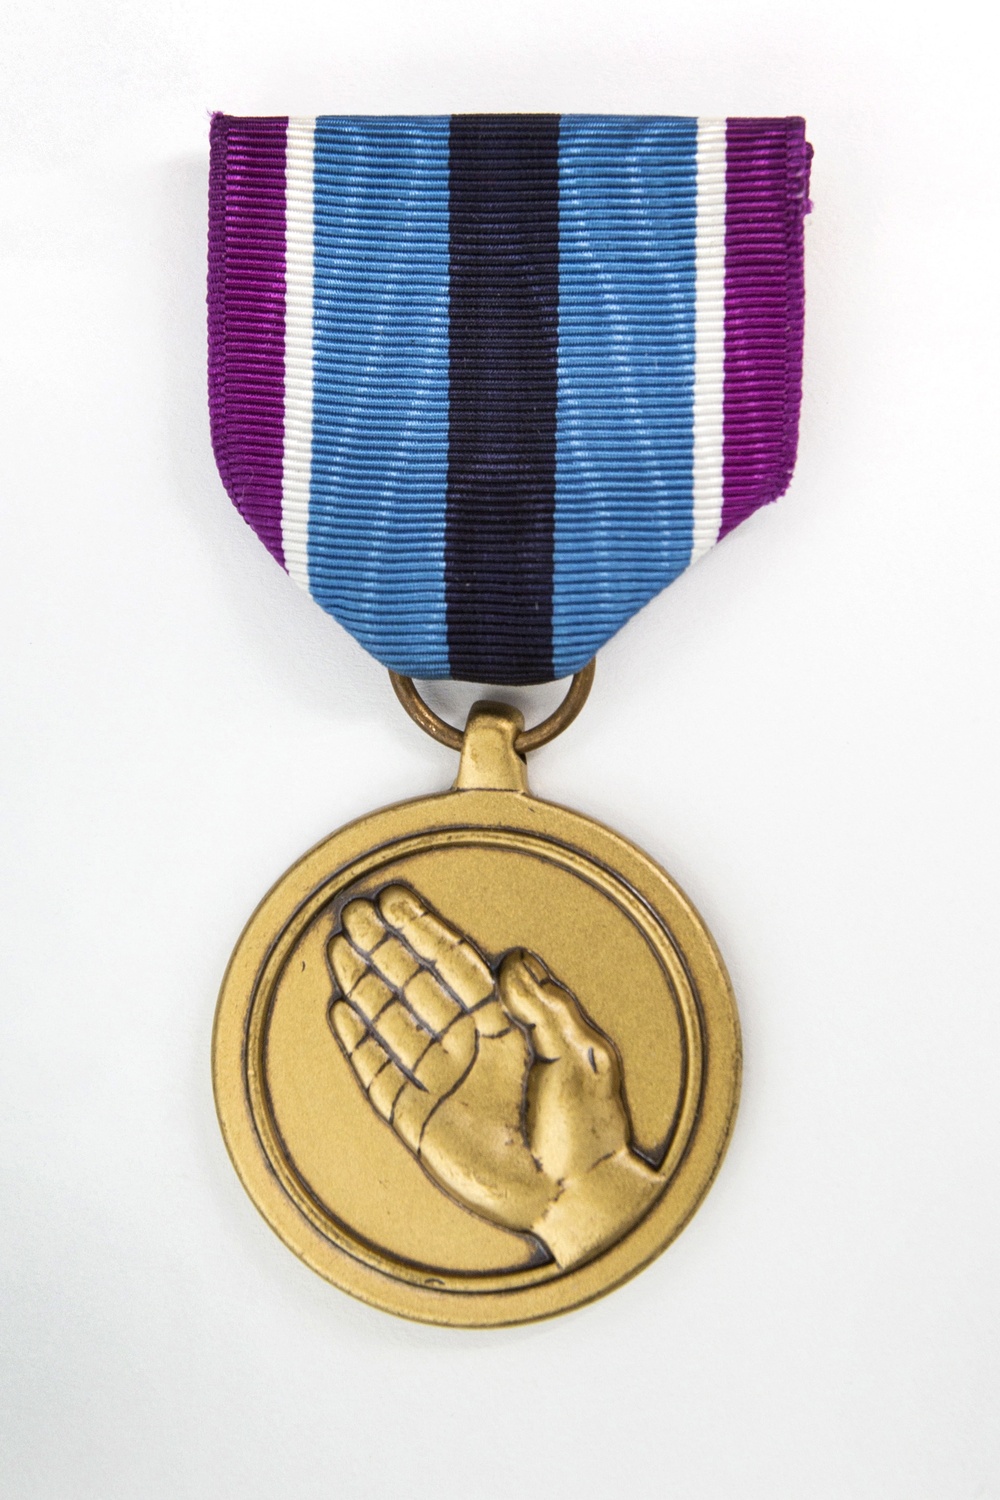 The Humanitarian Service Medal